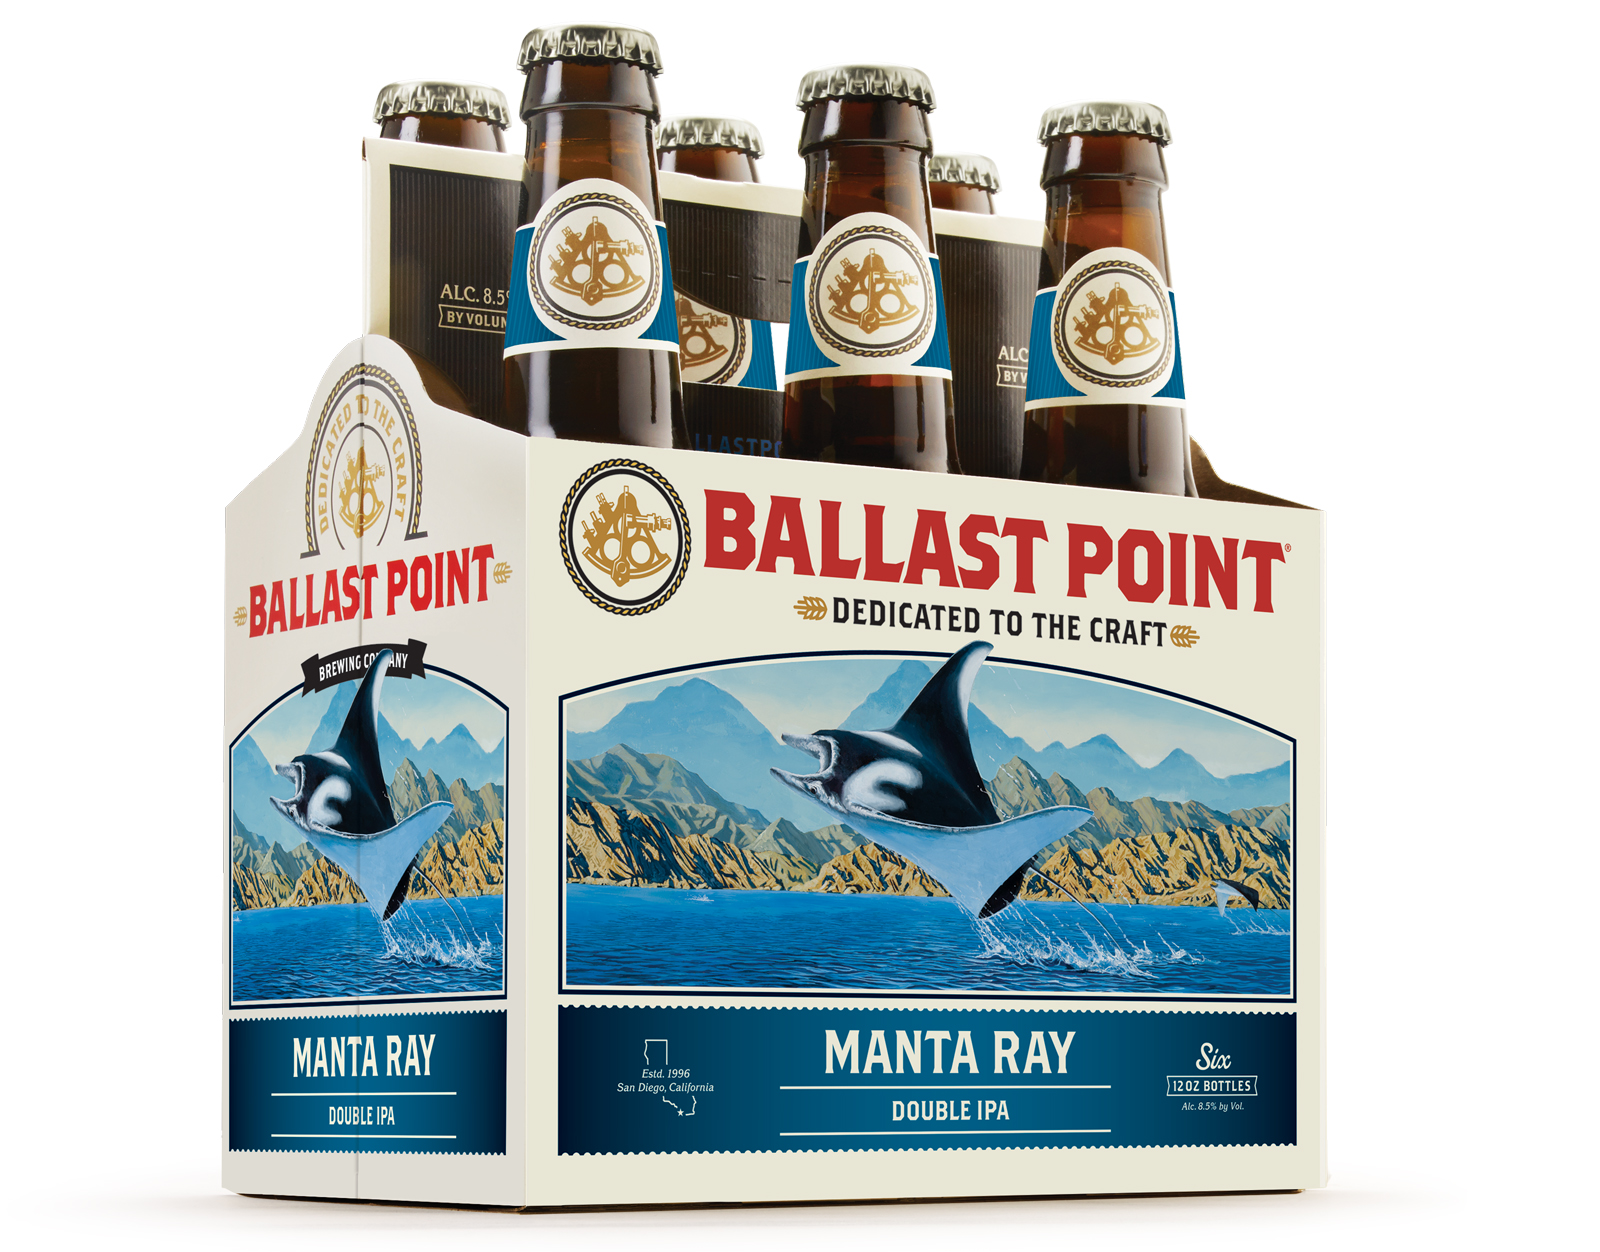 Ballast Point Art Nail Stickers - wide 4